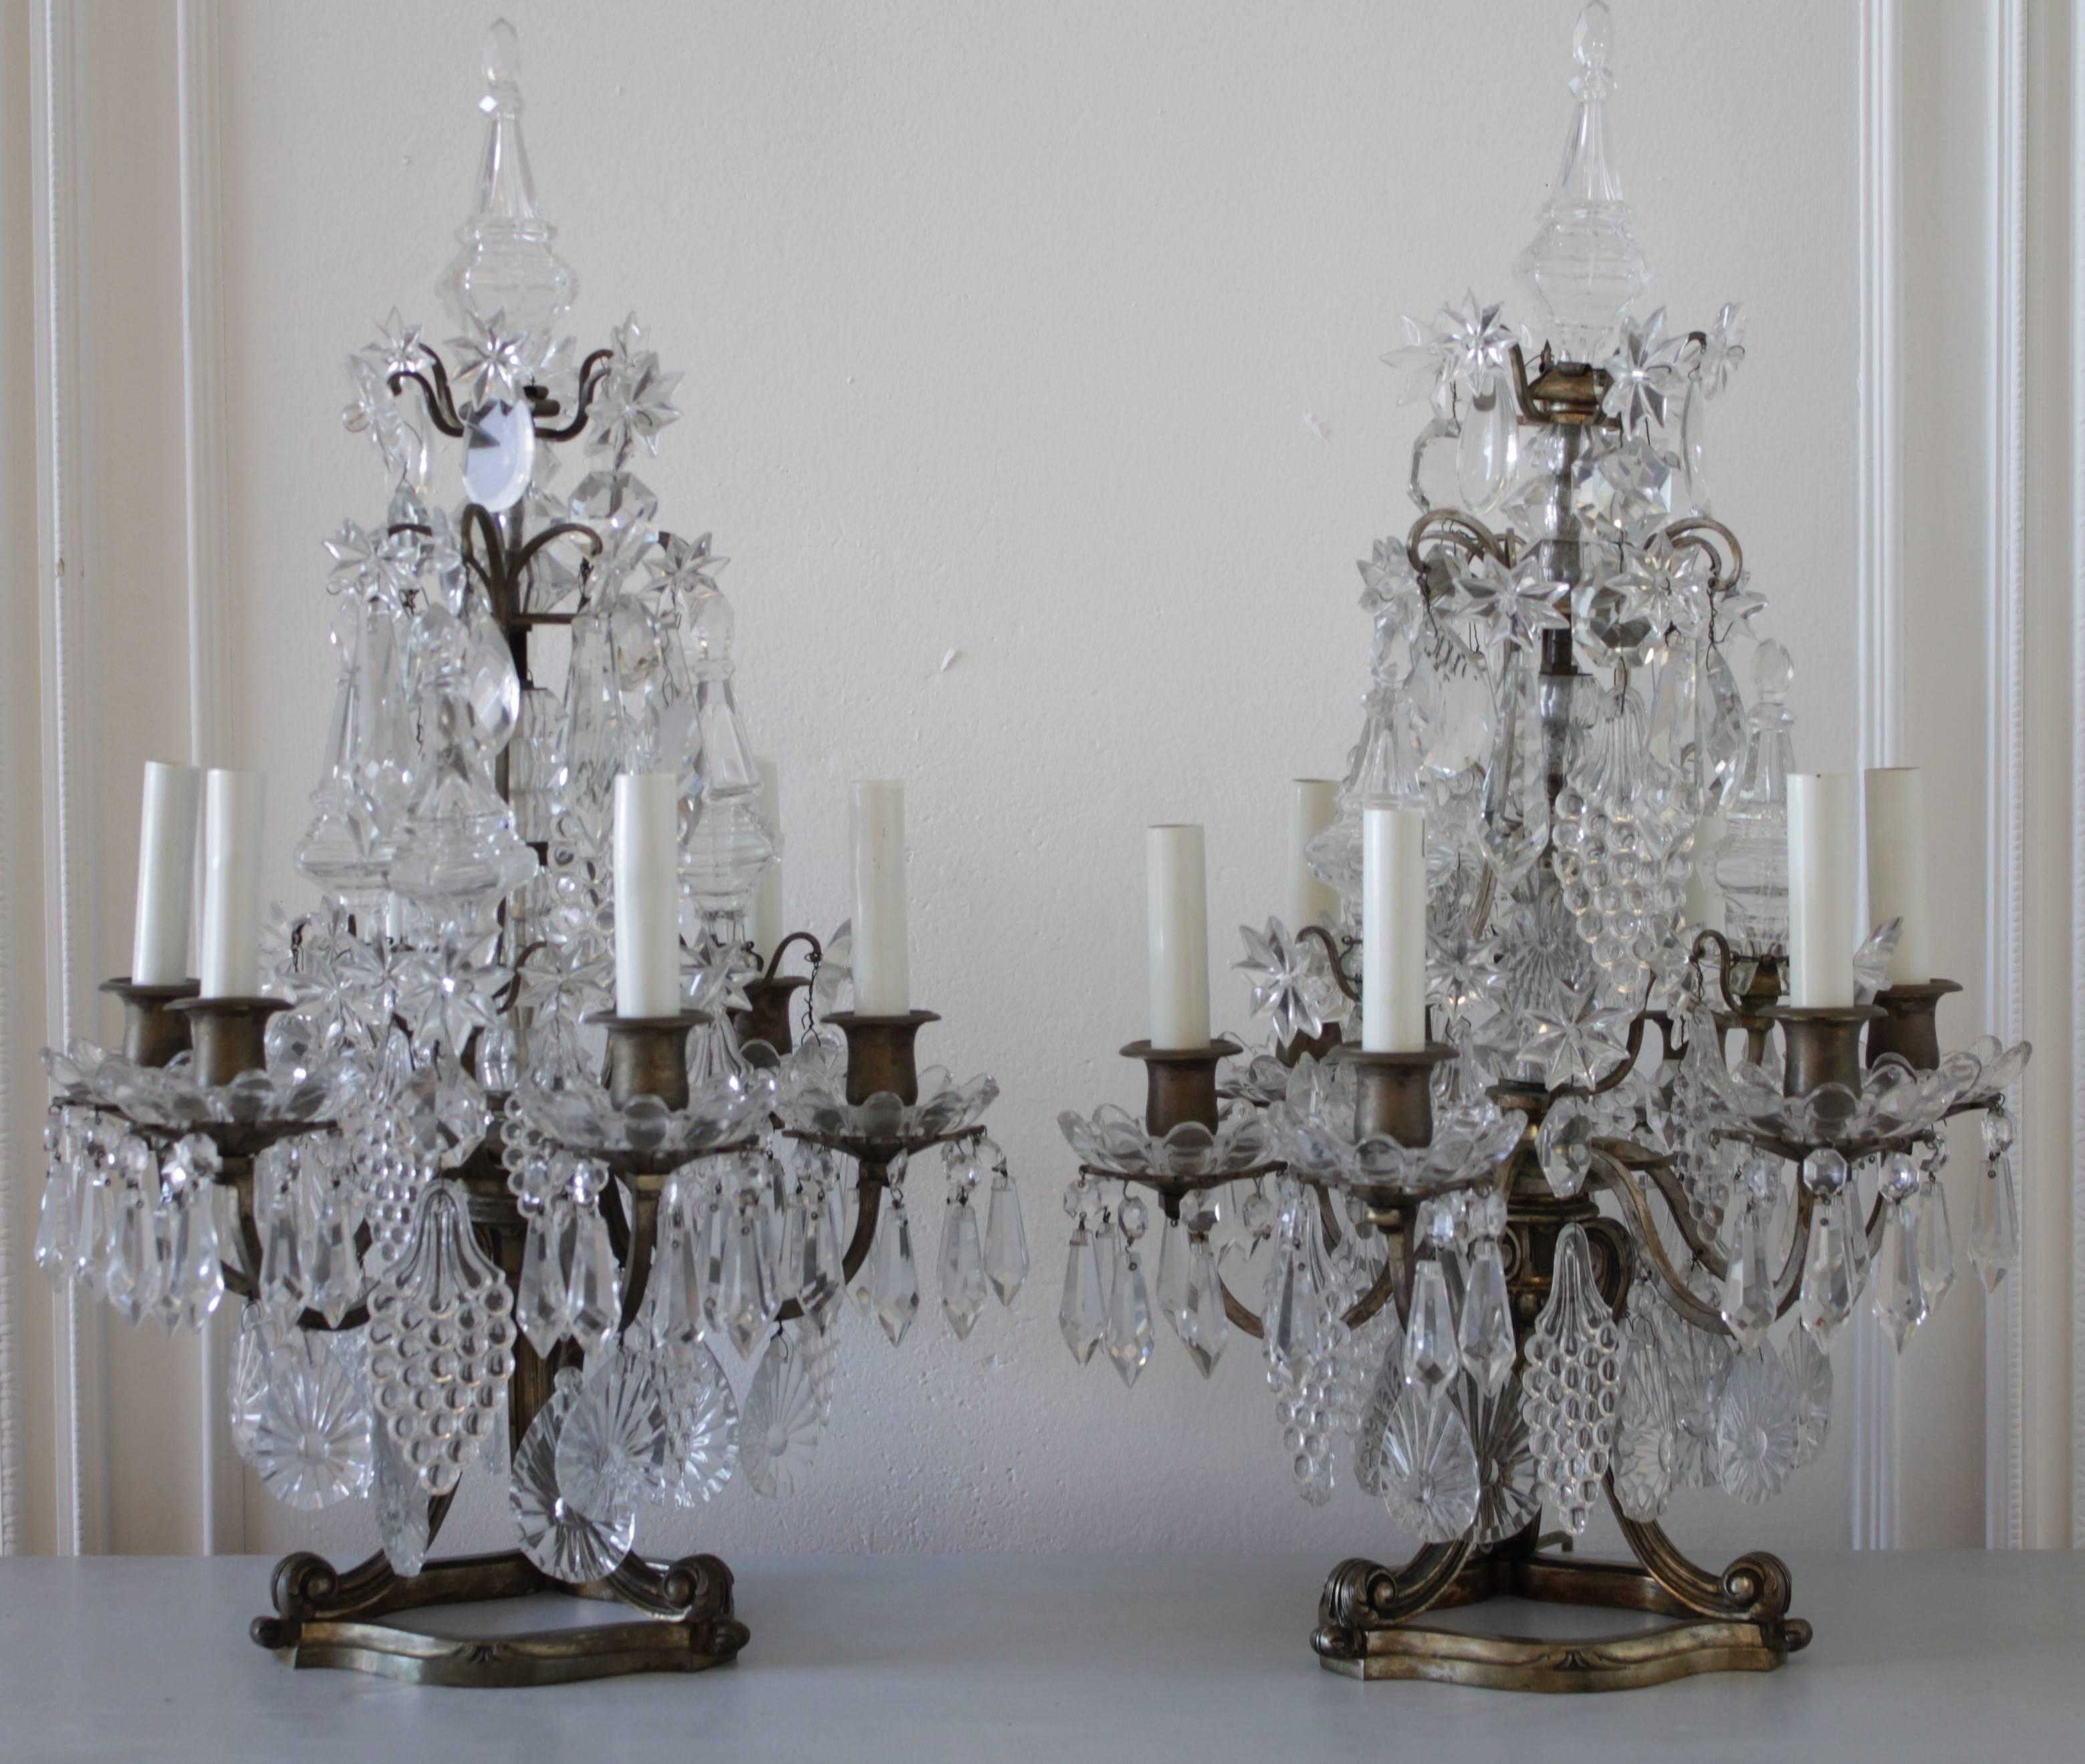 Gorgeous pair of dripping crystal candelabra. These are loaded with very unusual shaped grape crystals, tear drop crystals with sunbursts and spheres. Large obelisks, and star-shaped florets, drape down to the beautiful glass cupped bobeches. Each